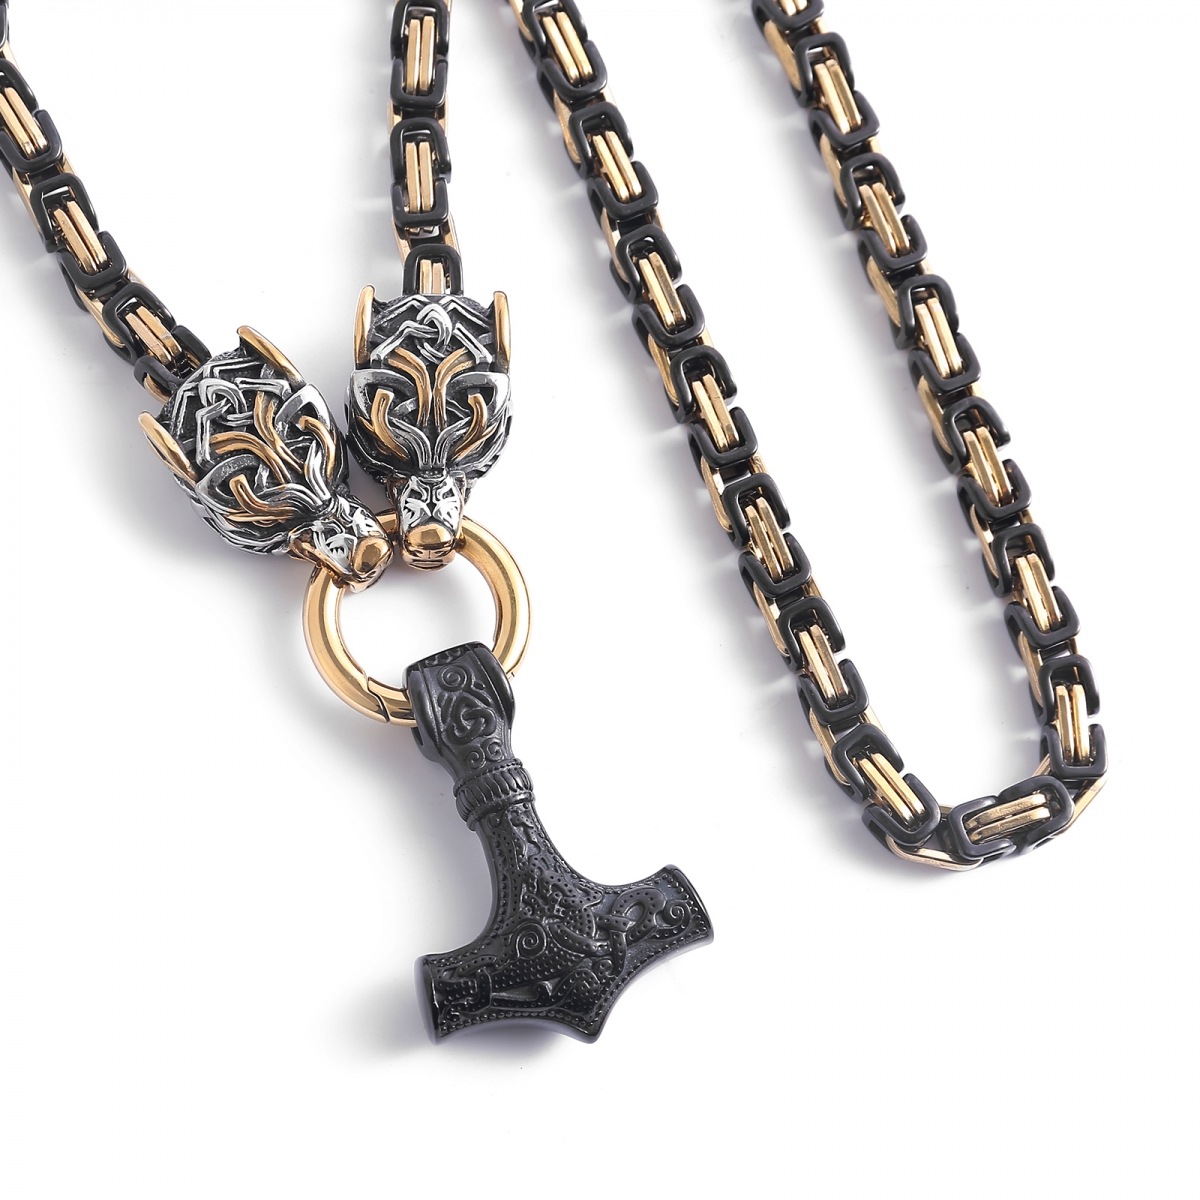 Wolf Hold Mjolnir Necklace King Chain US$12/PC-NORSECOLLECTION- Viking Jewelry,Viking Necklace,Viking Bracelet,Viking Rings,Viking Mugs,Viking Accessories,Viking Crafts